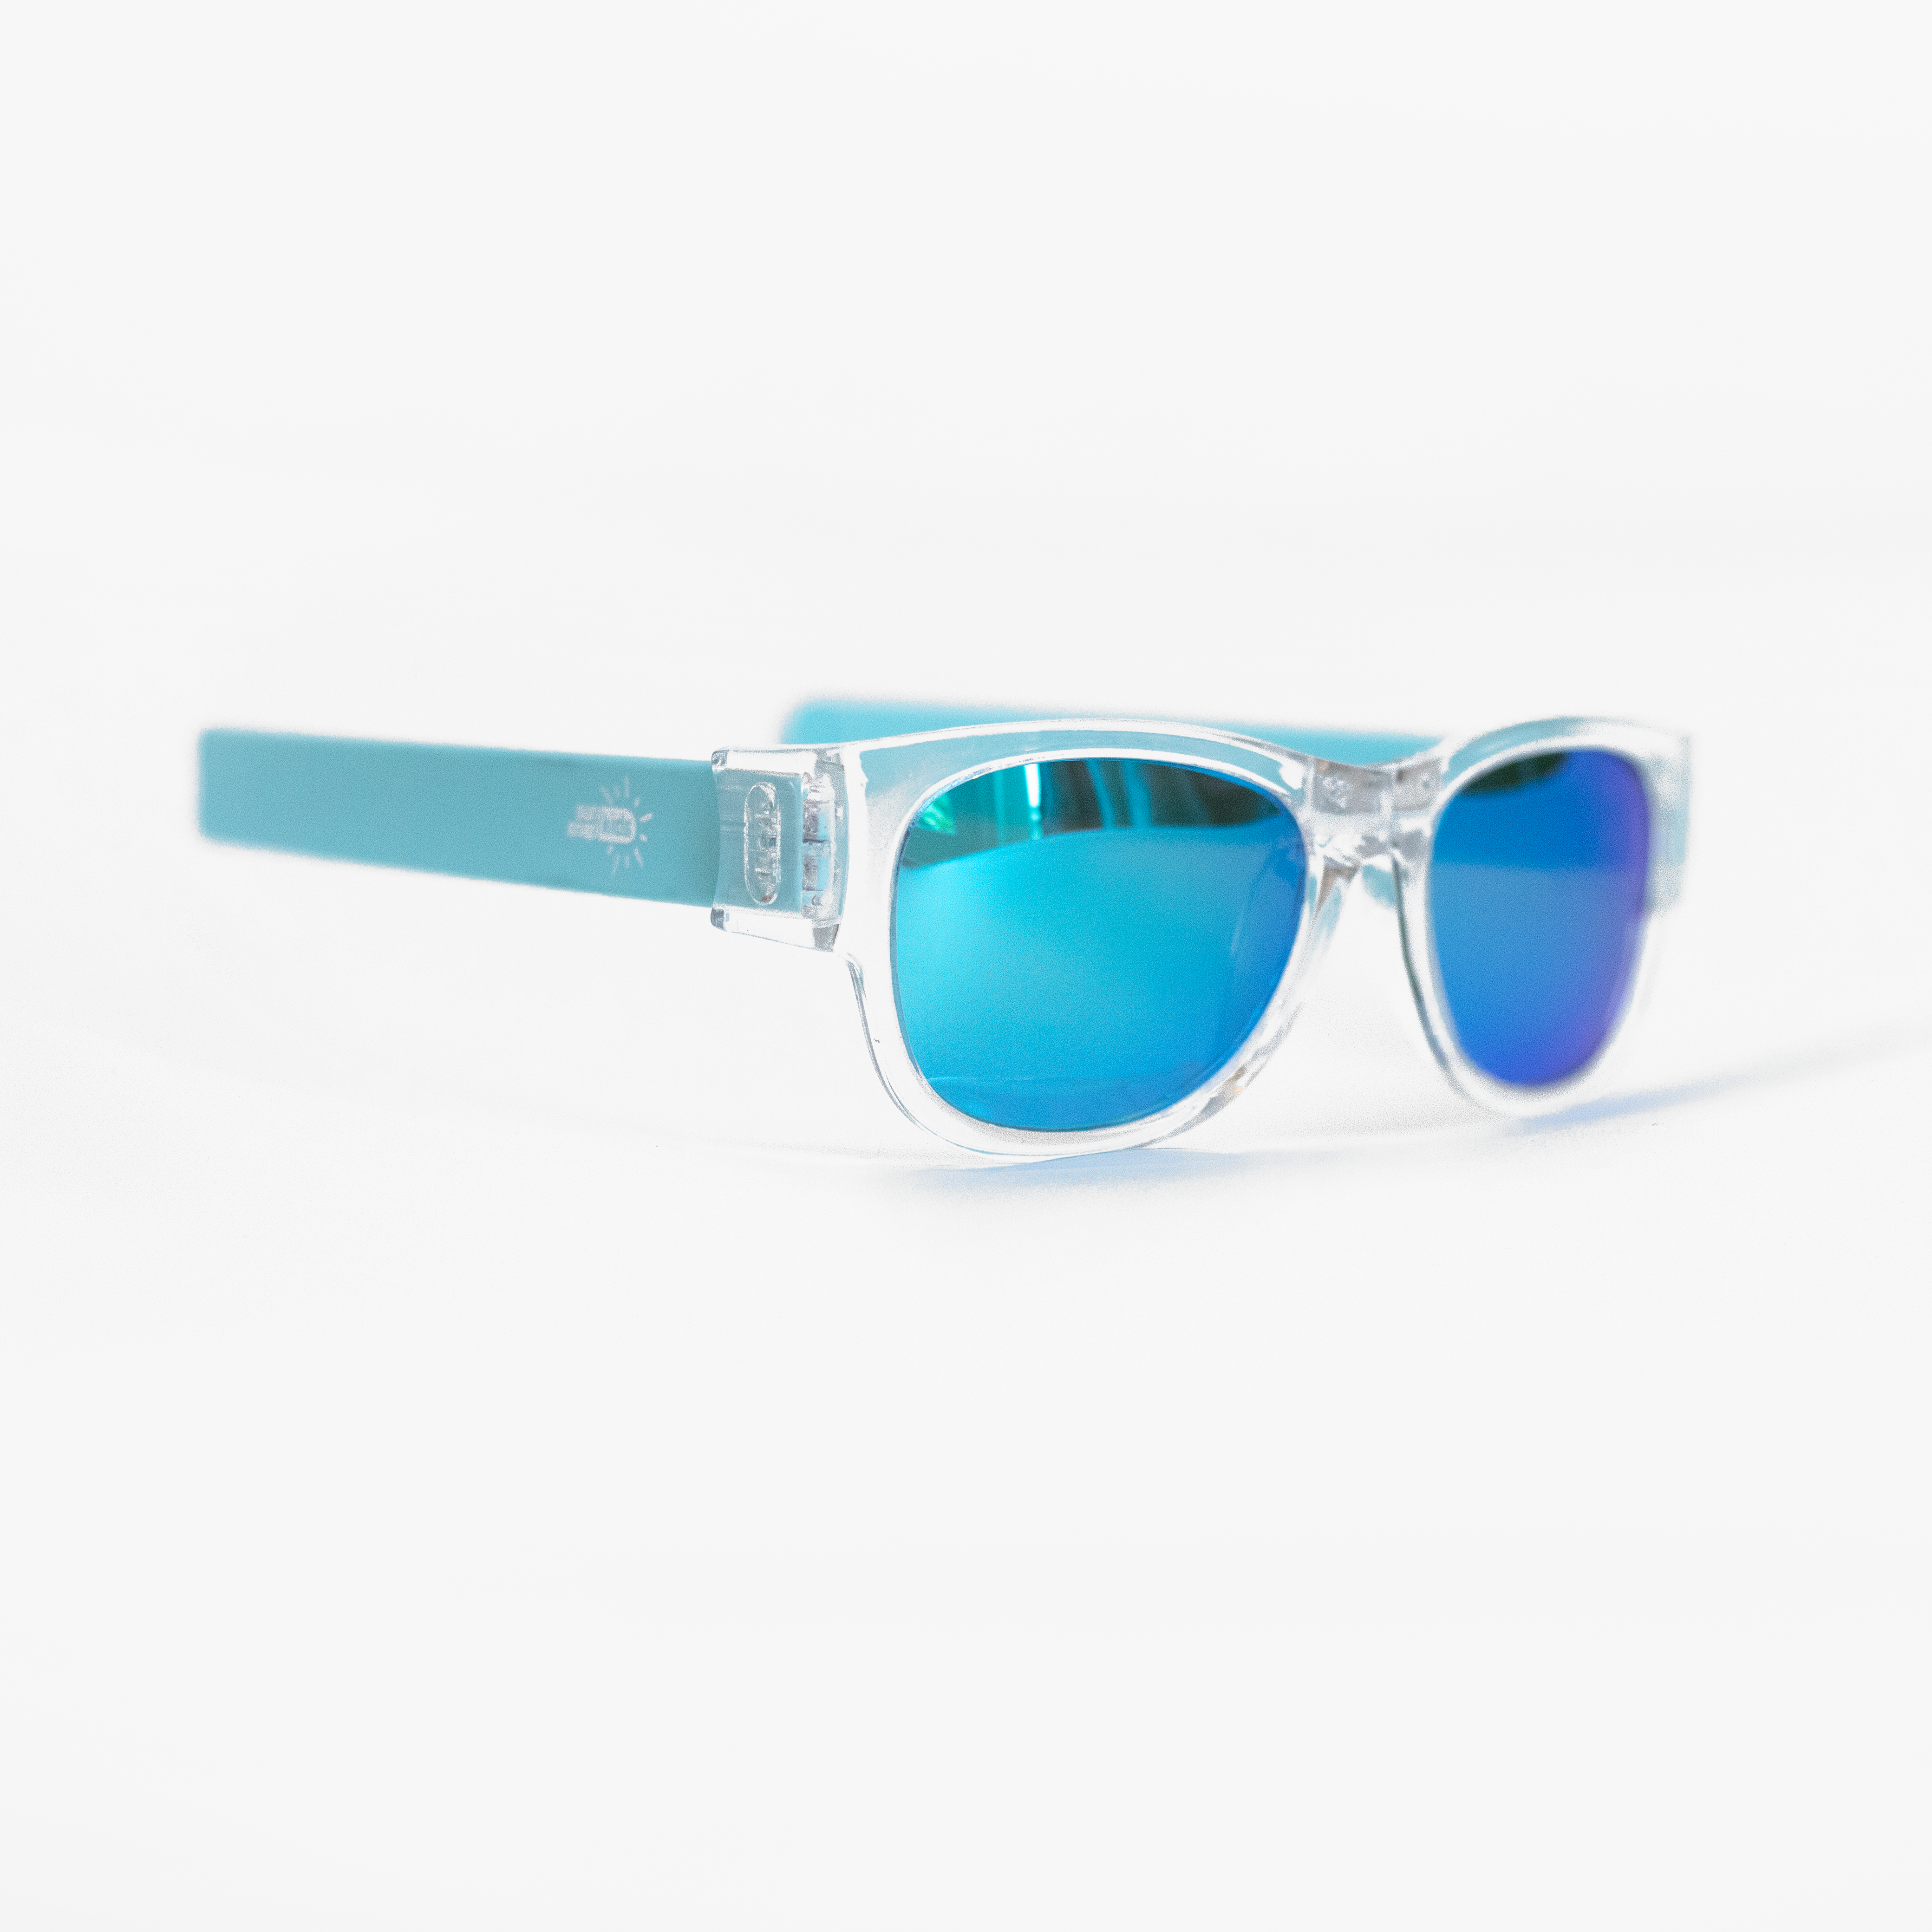 Blue Snappable Sunglasses: Polarized